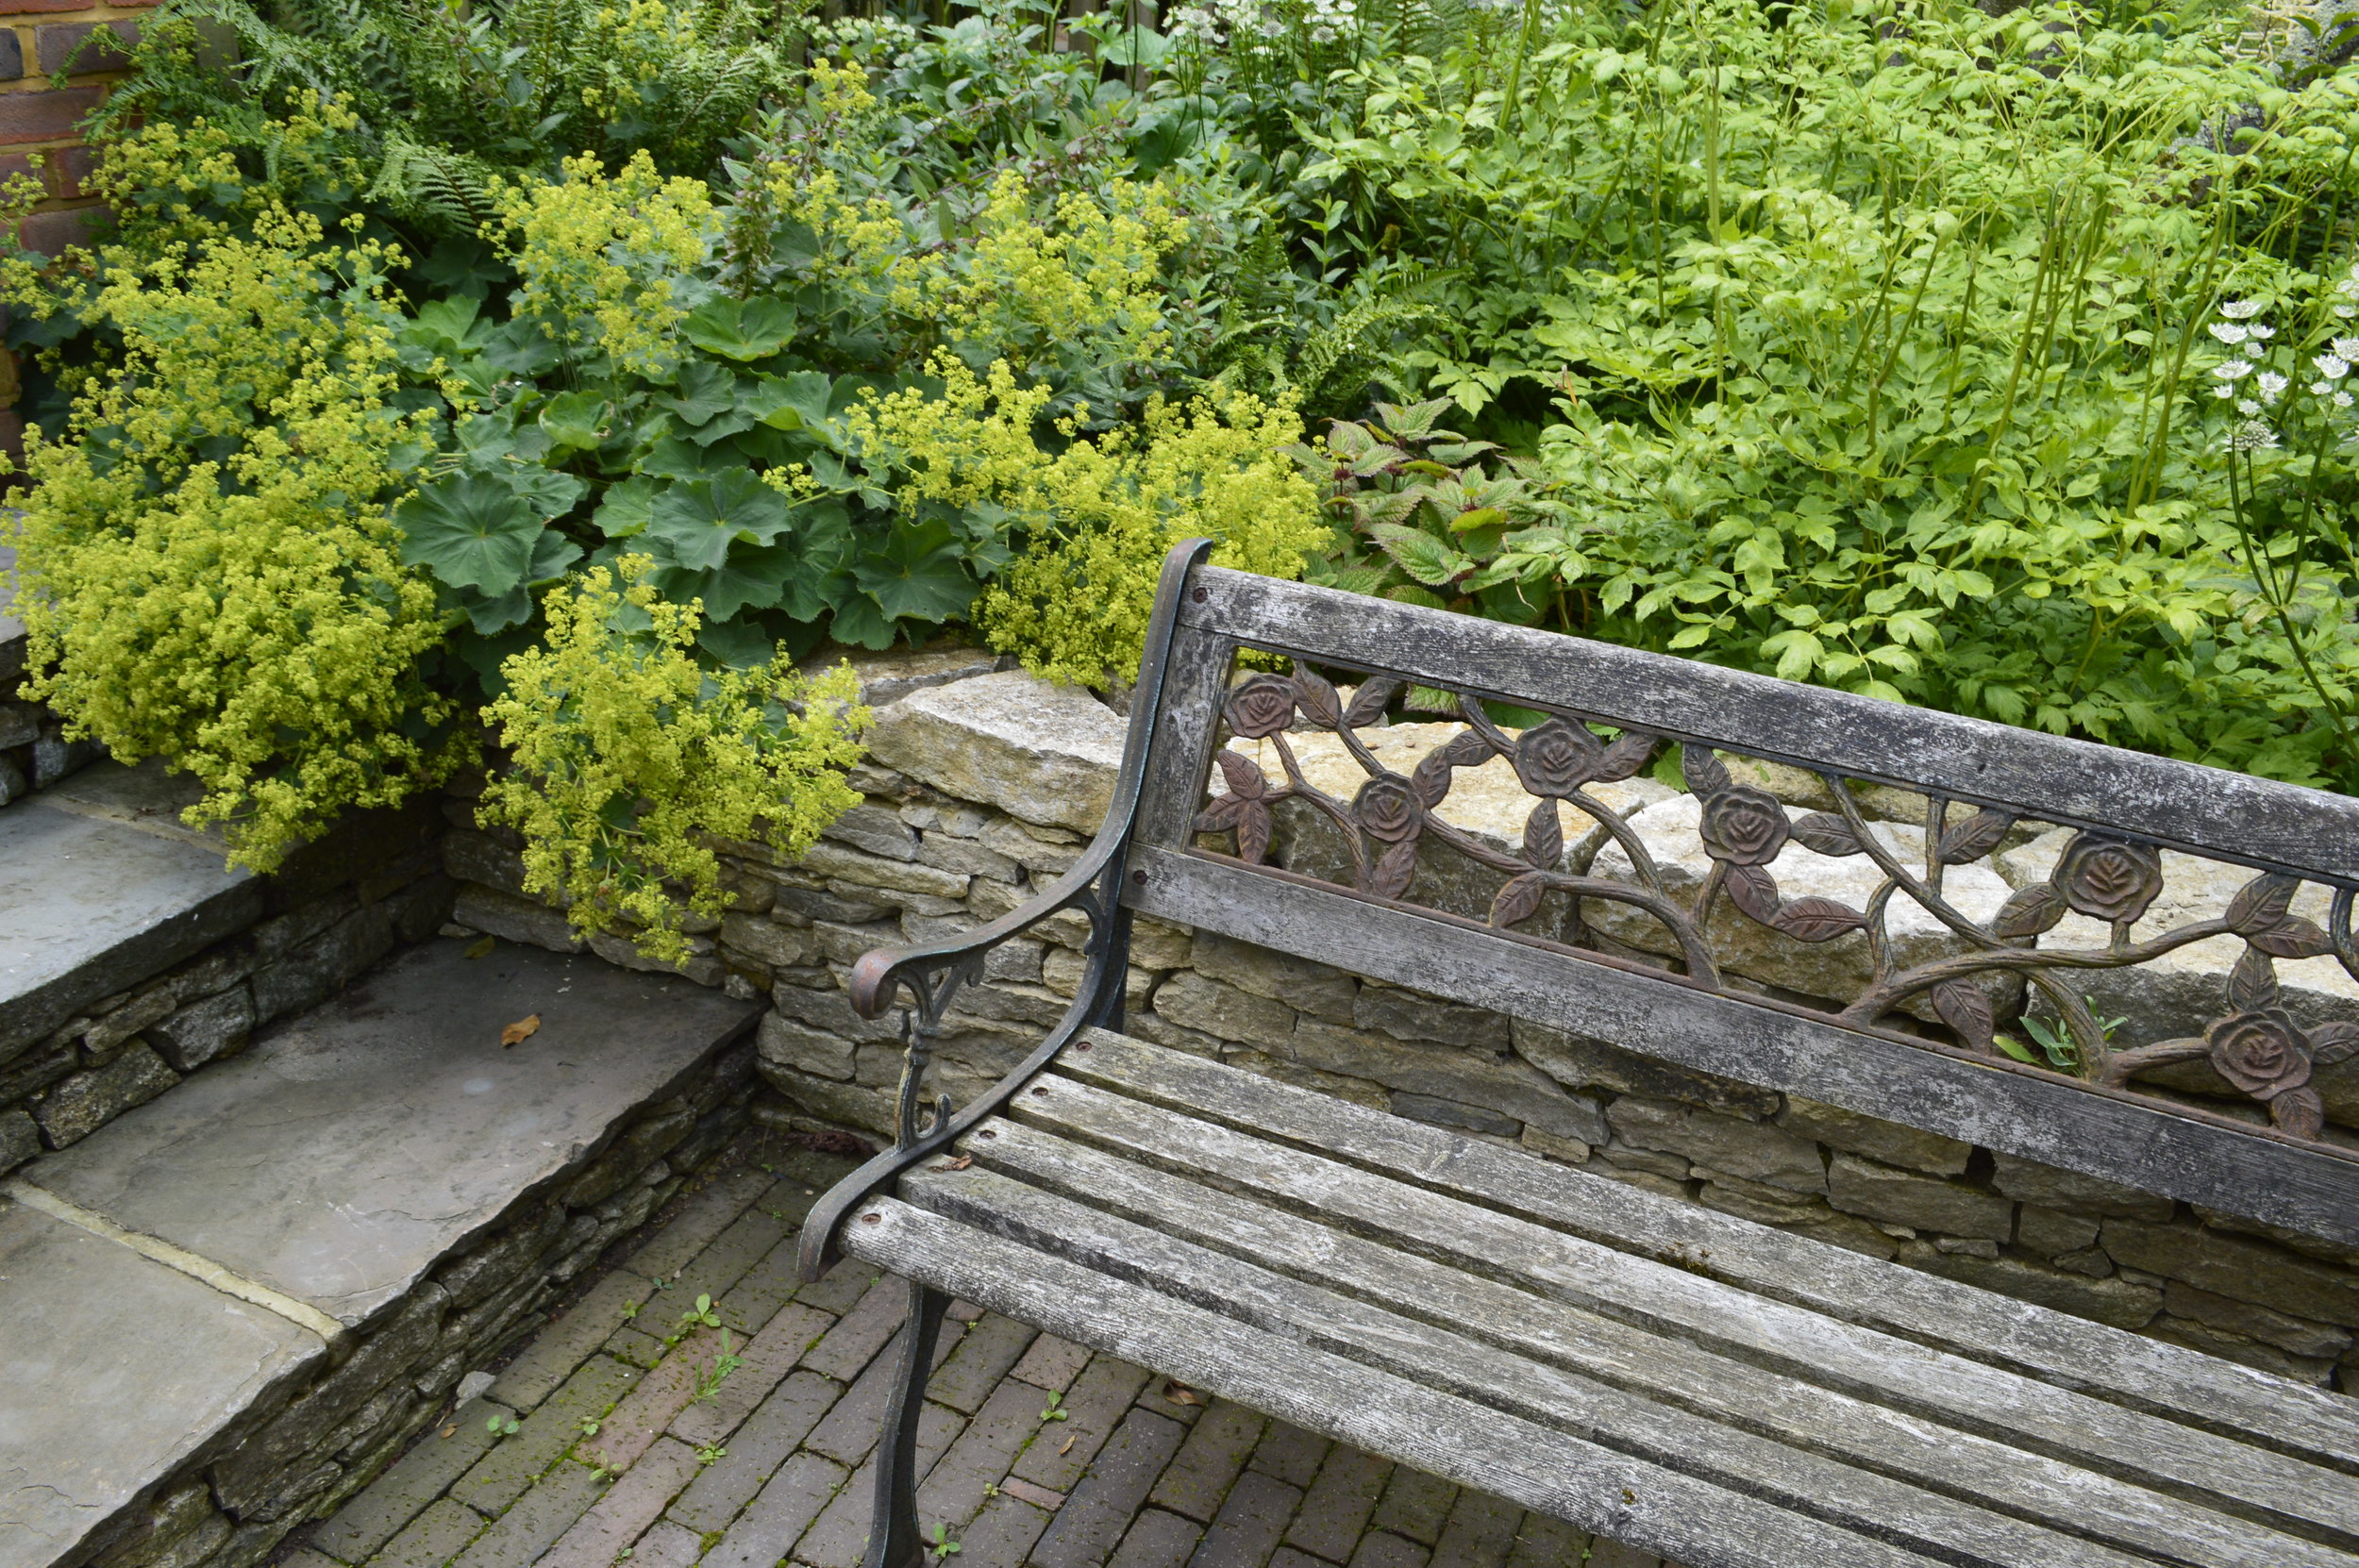 Steps and Walls - using natural materials with a vintage bench is a perfect match